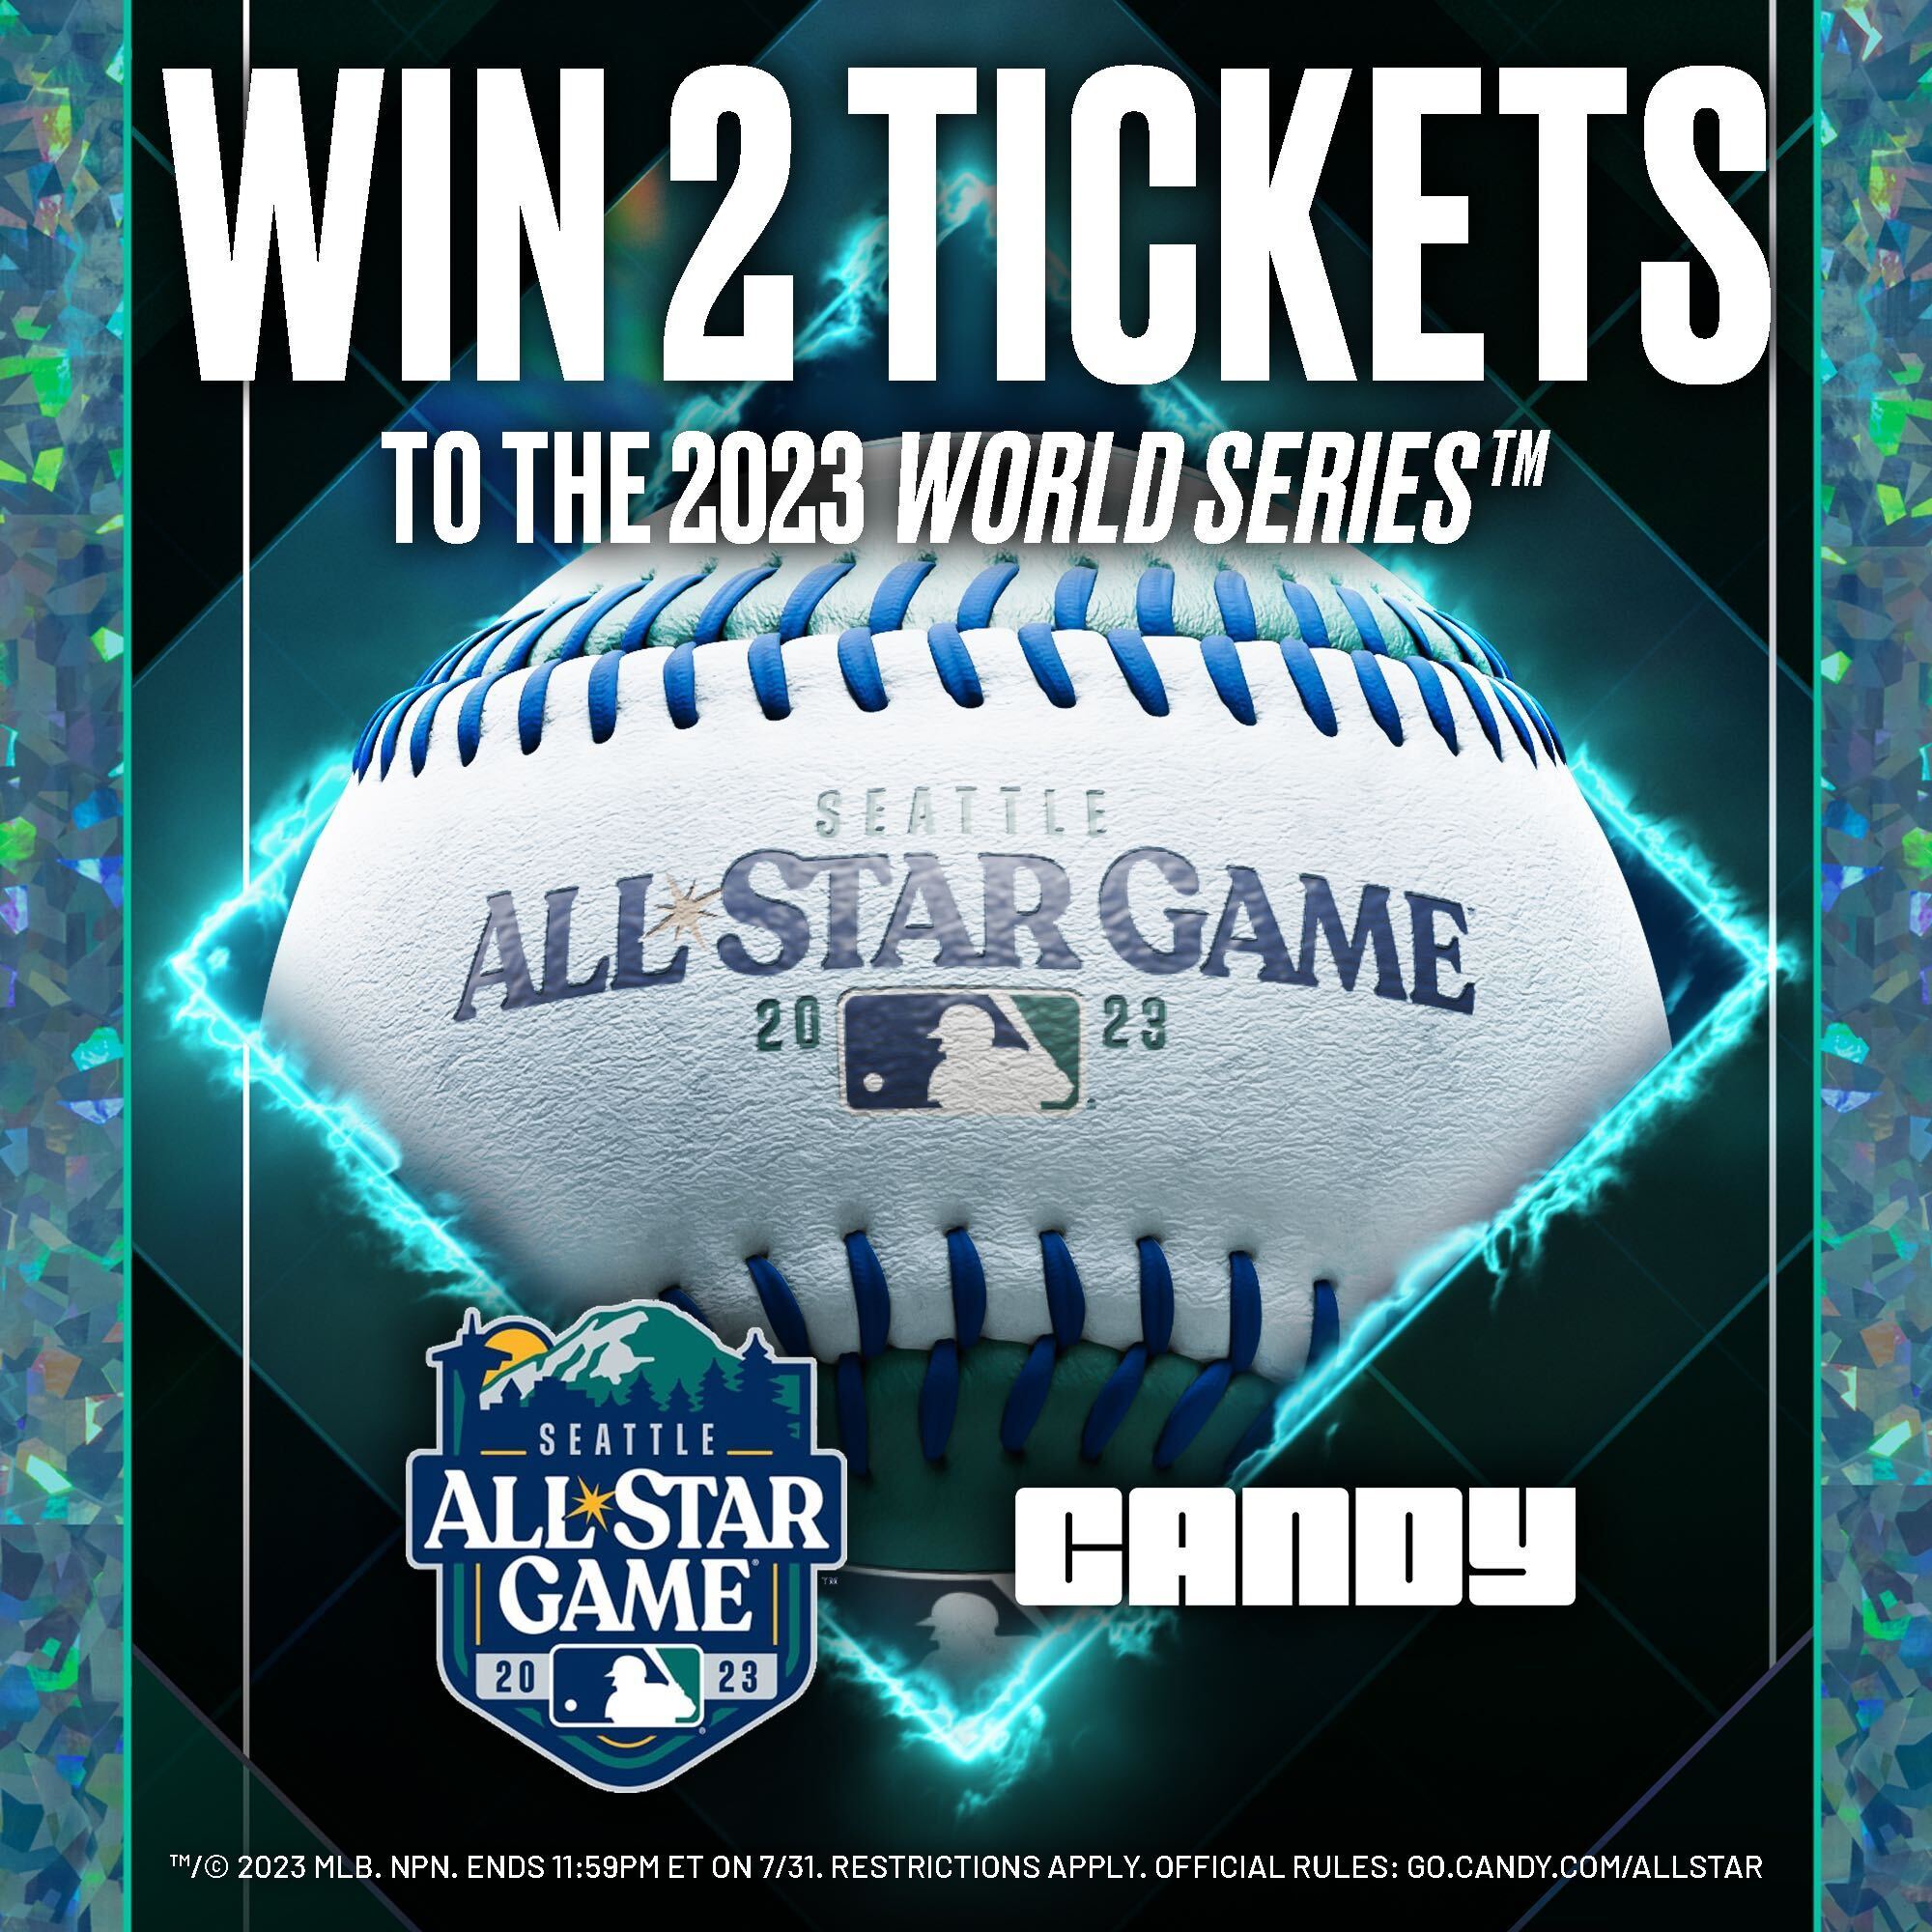 Candy Digital and MLB Team Up Once Again to Commemorate All-Star Week with Digital Collectibles